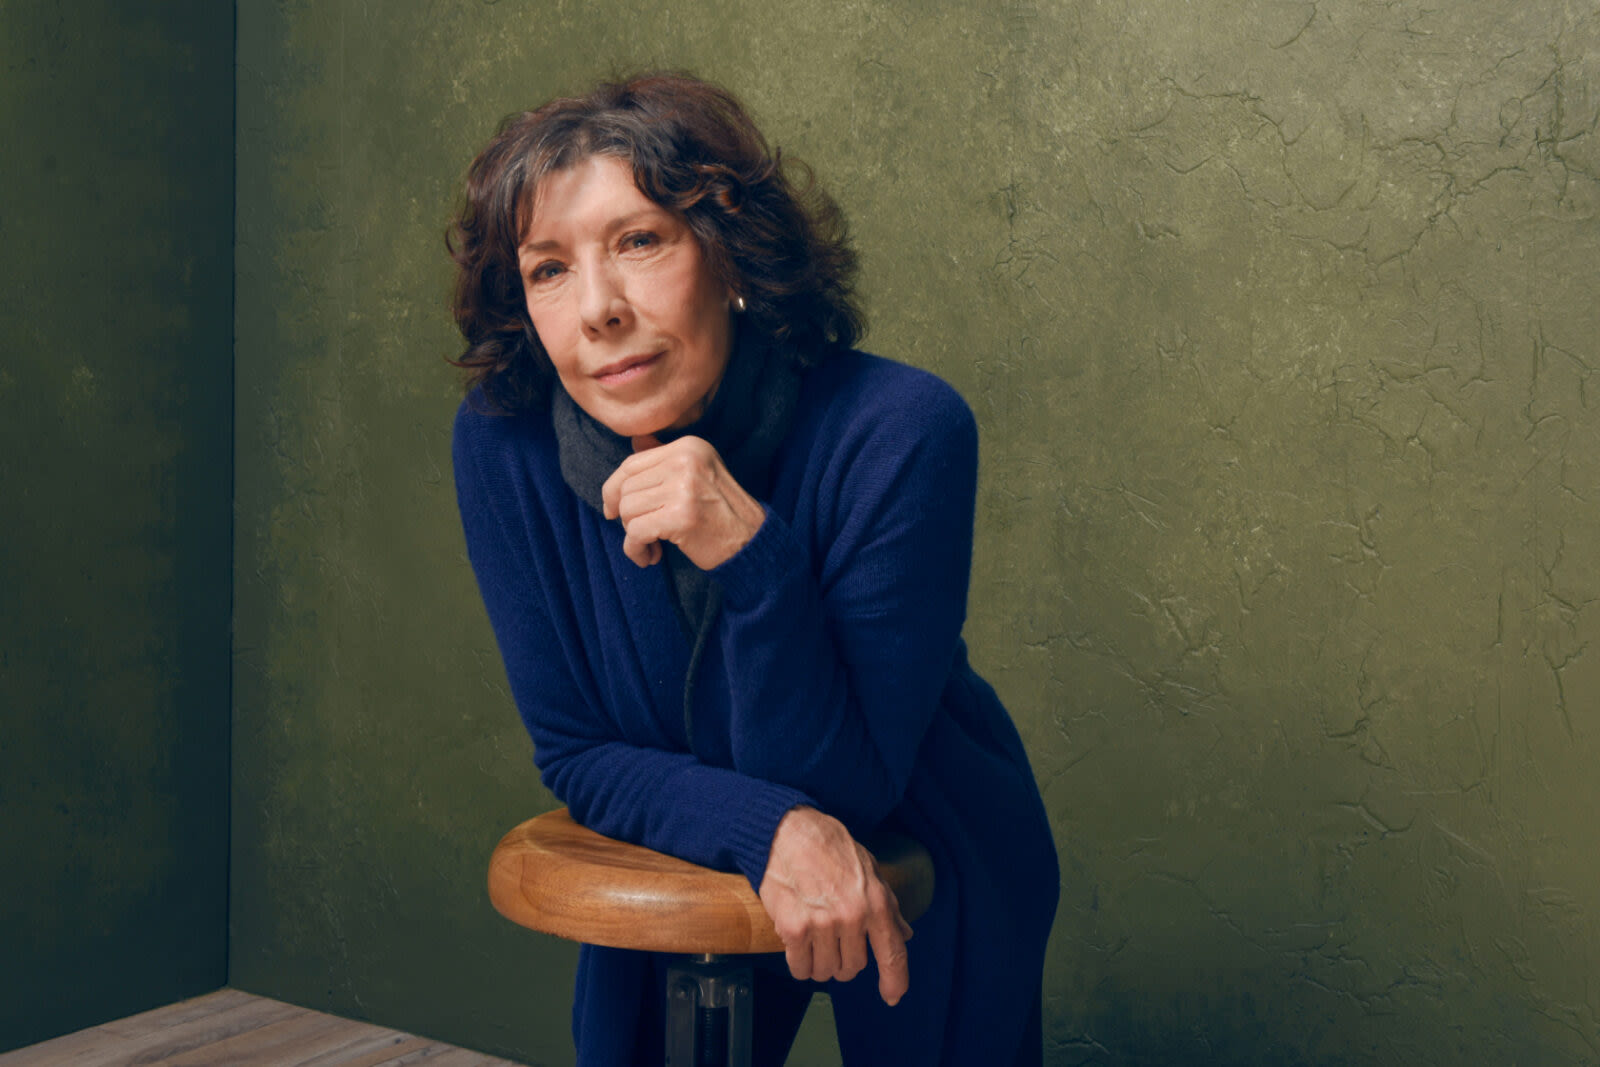 The Sounds of America: Lily Tomlin